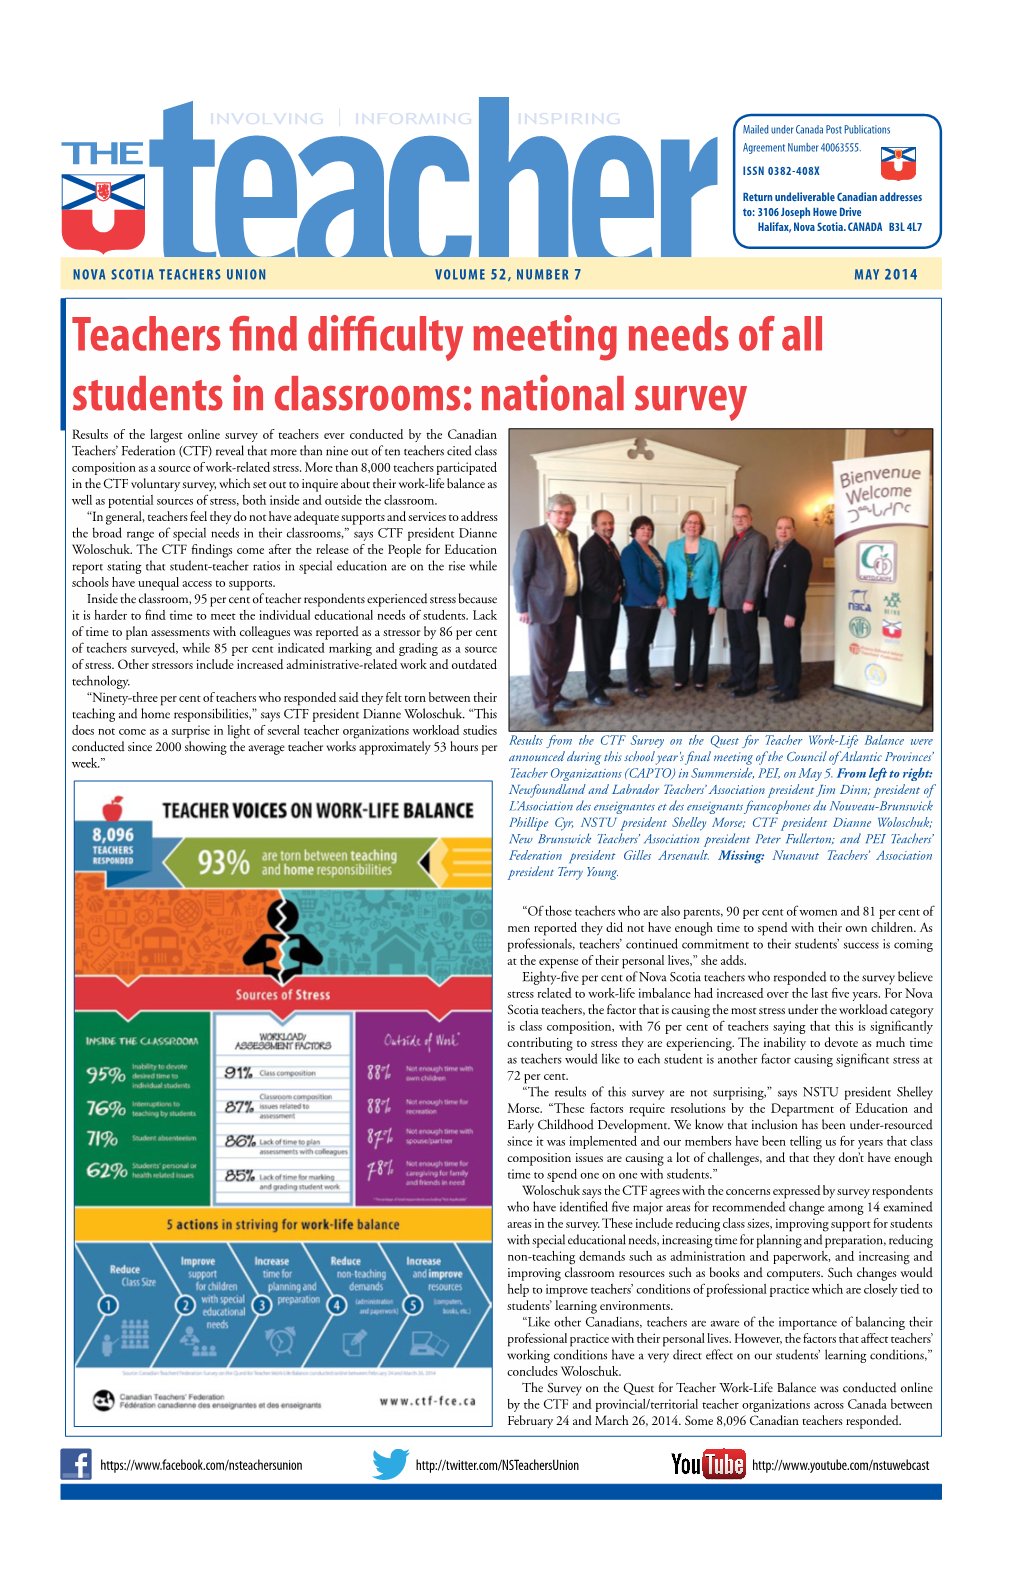 Teachers Find Difficulty Meeting Needs of All Students in Classrooms